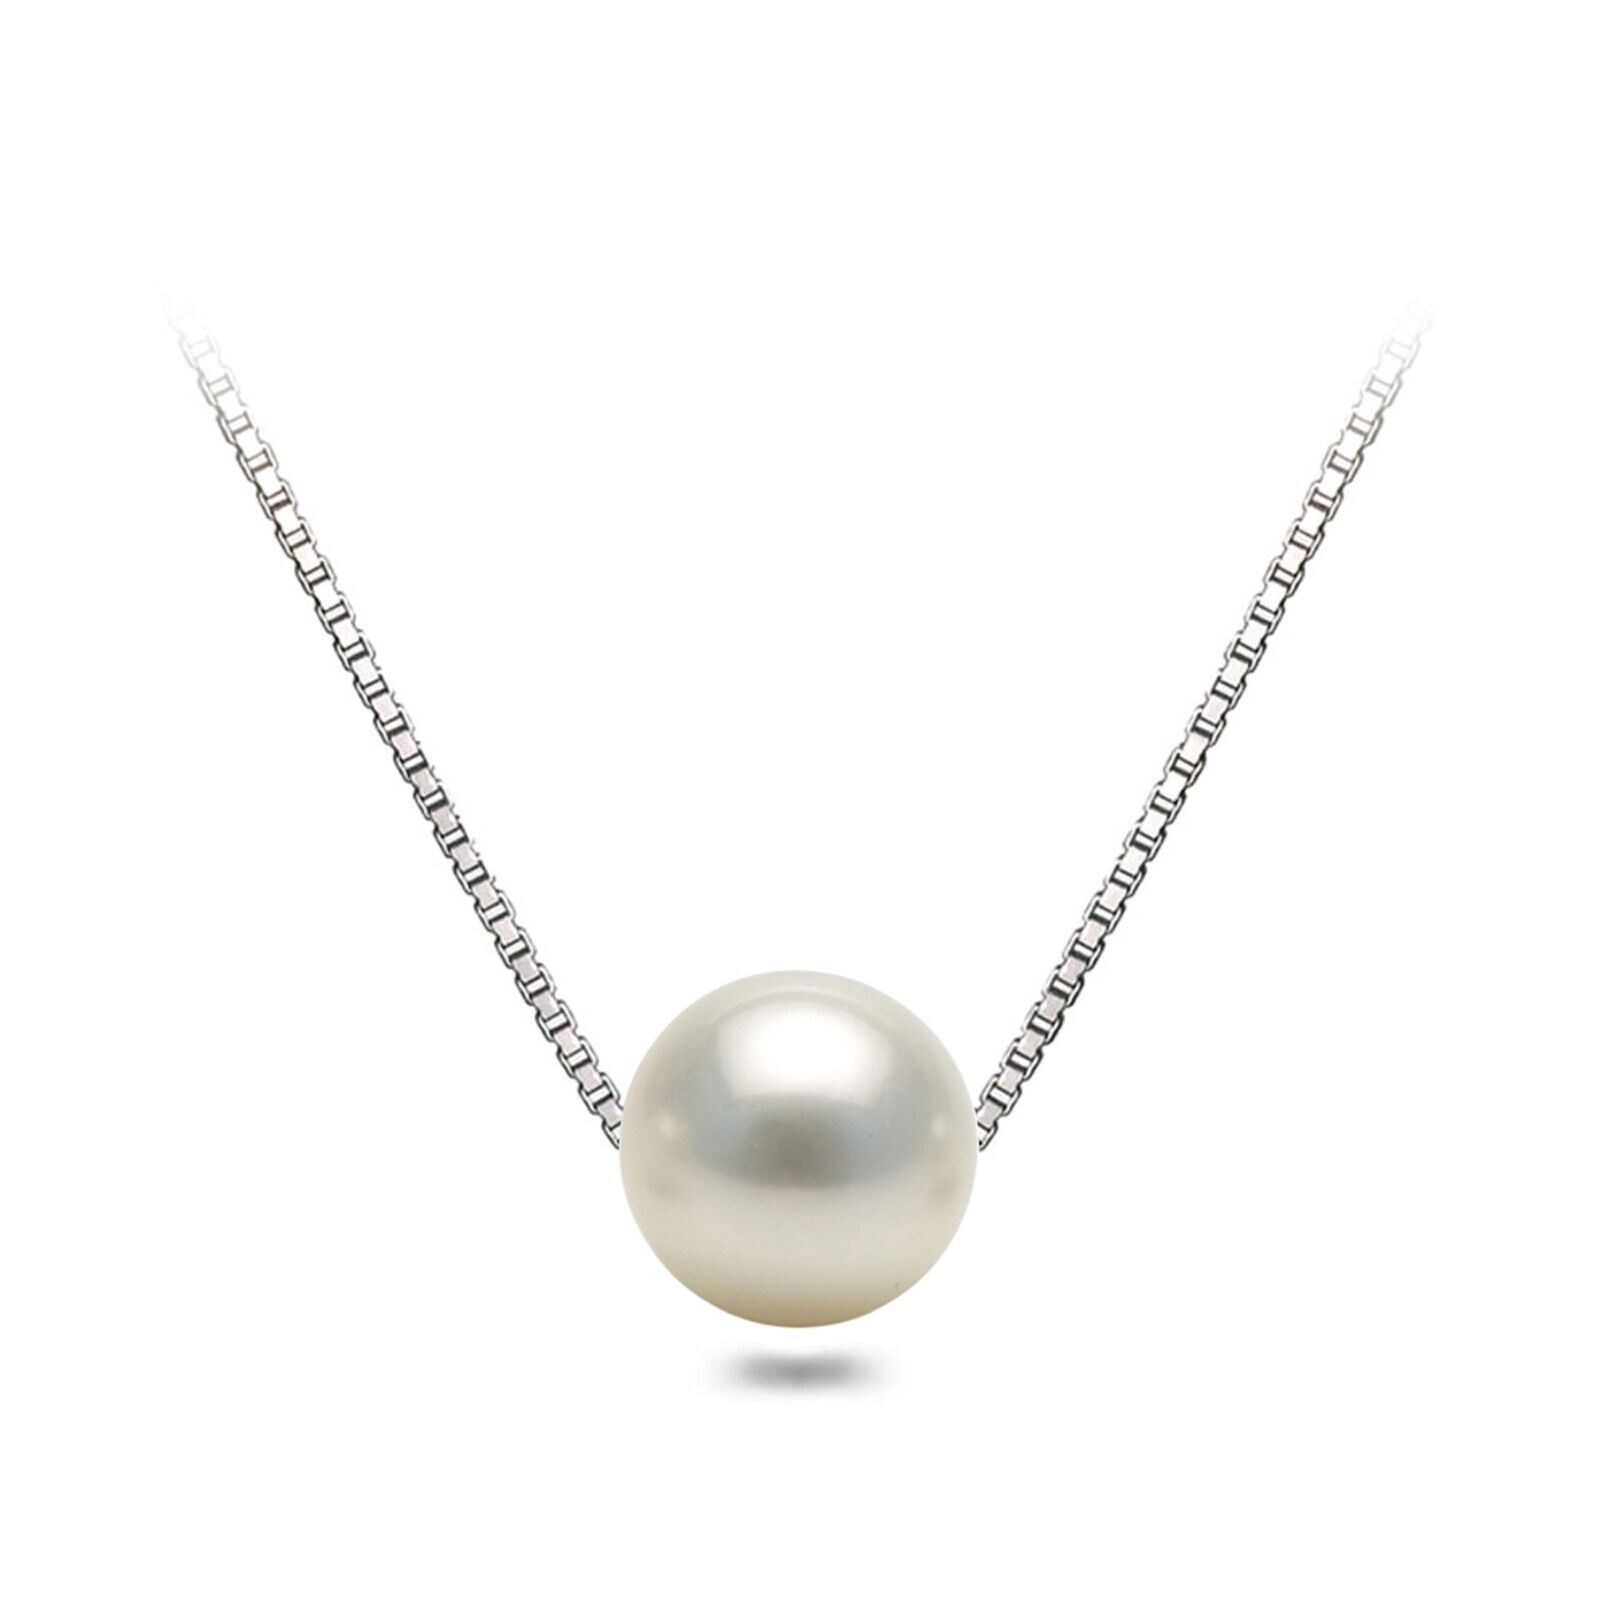 6-10mm Japanese Akoya Pearl Pendant Necklace AAAA Floating White Pearl Pendant